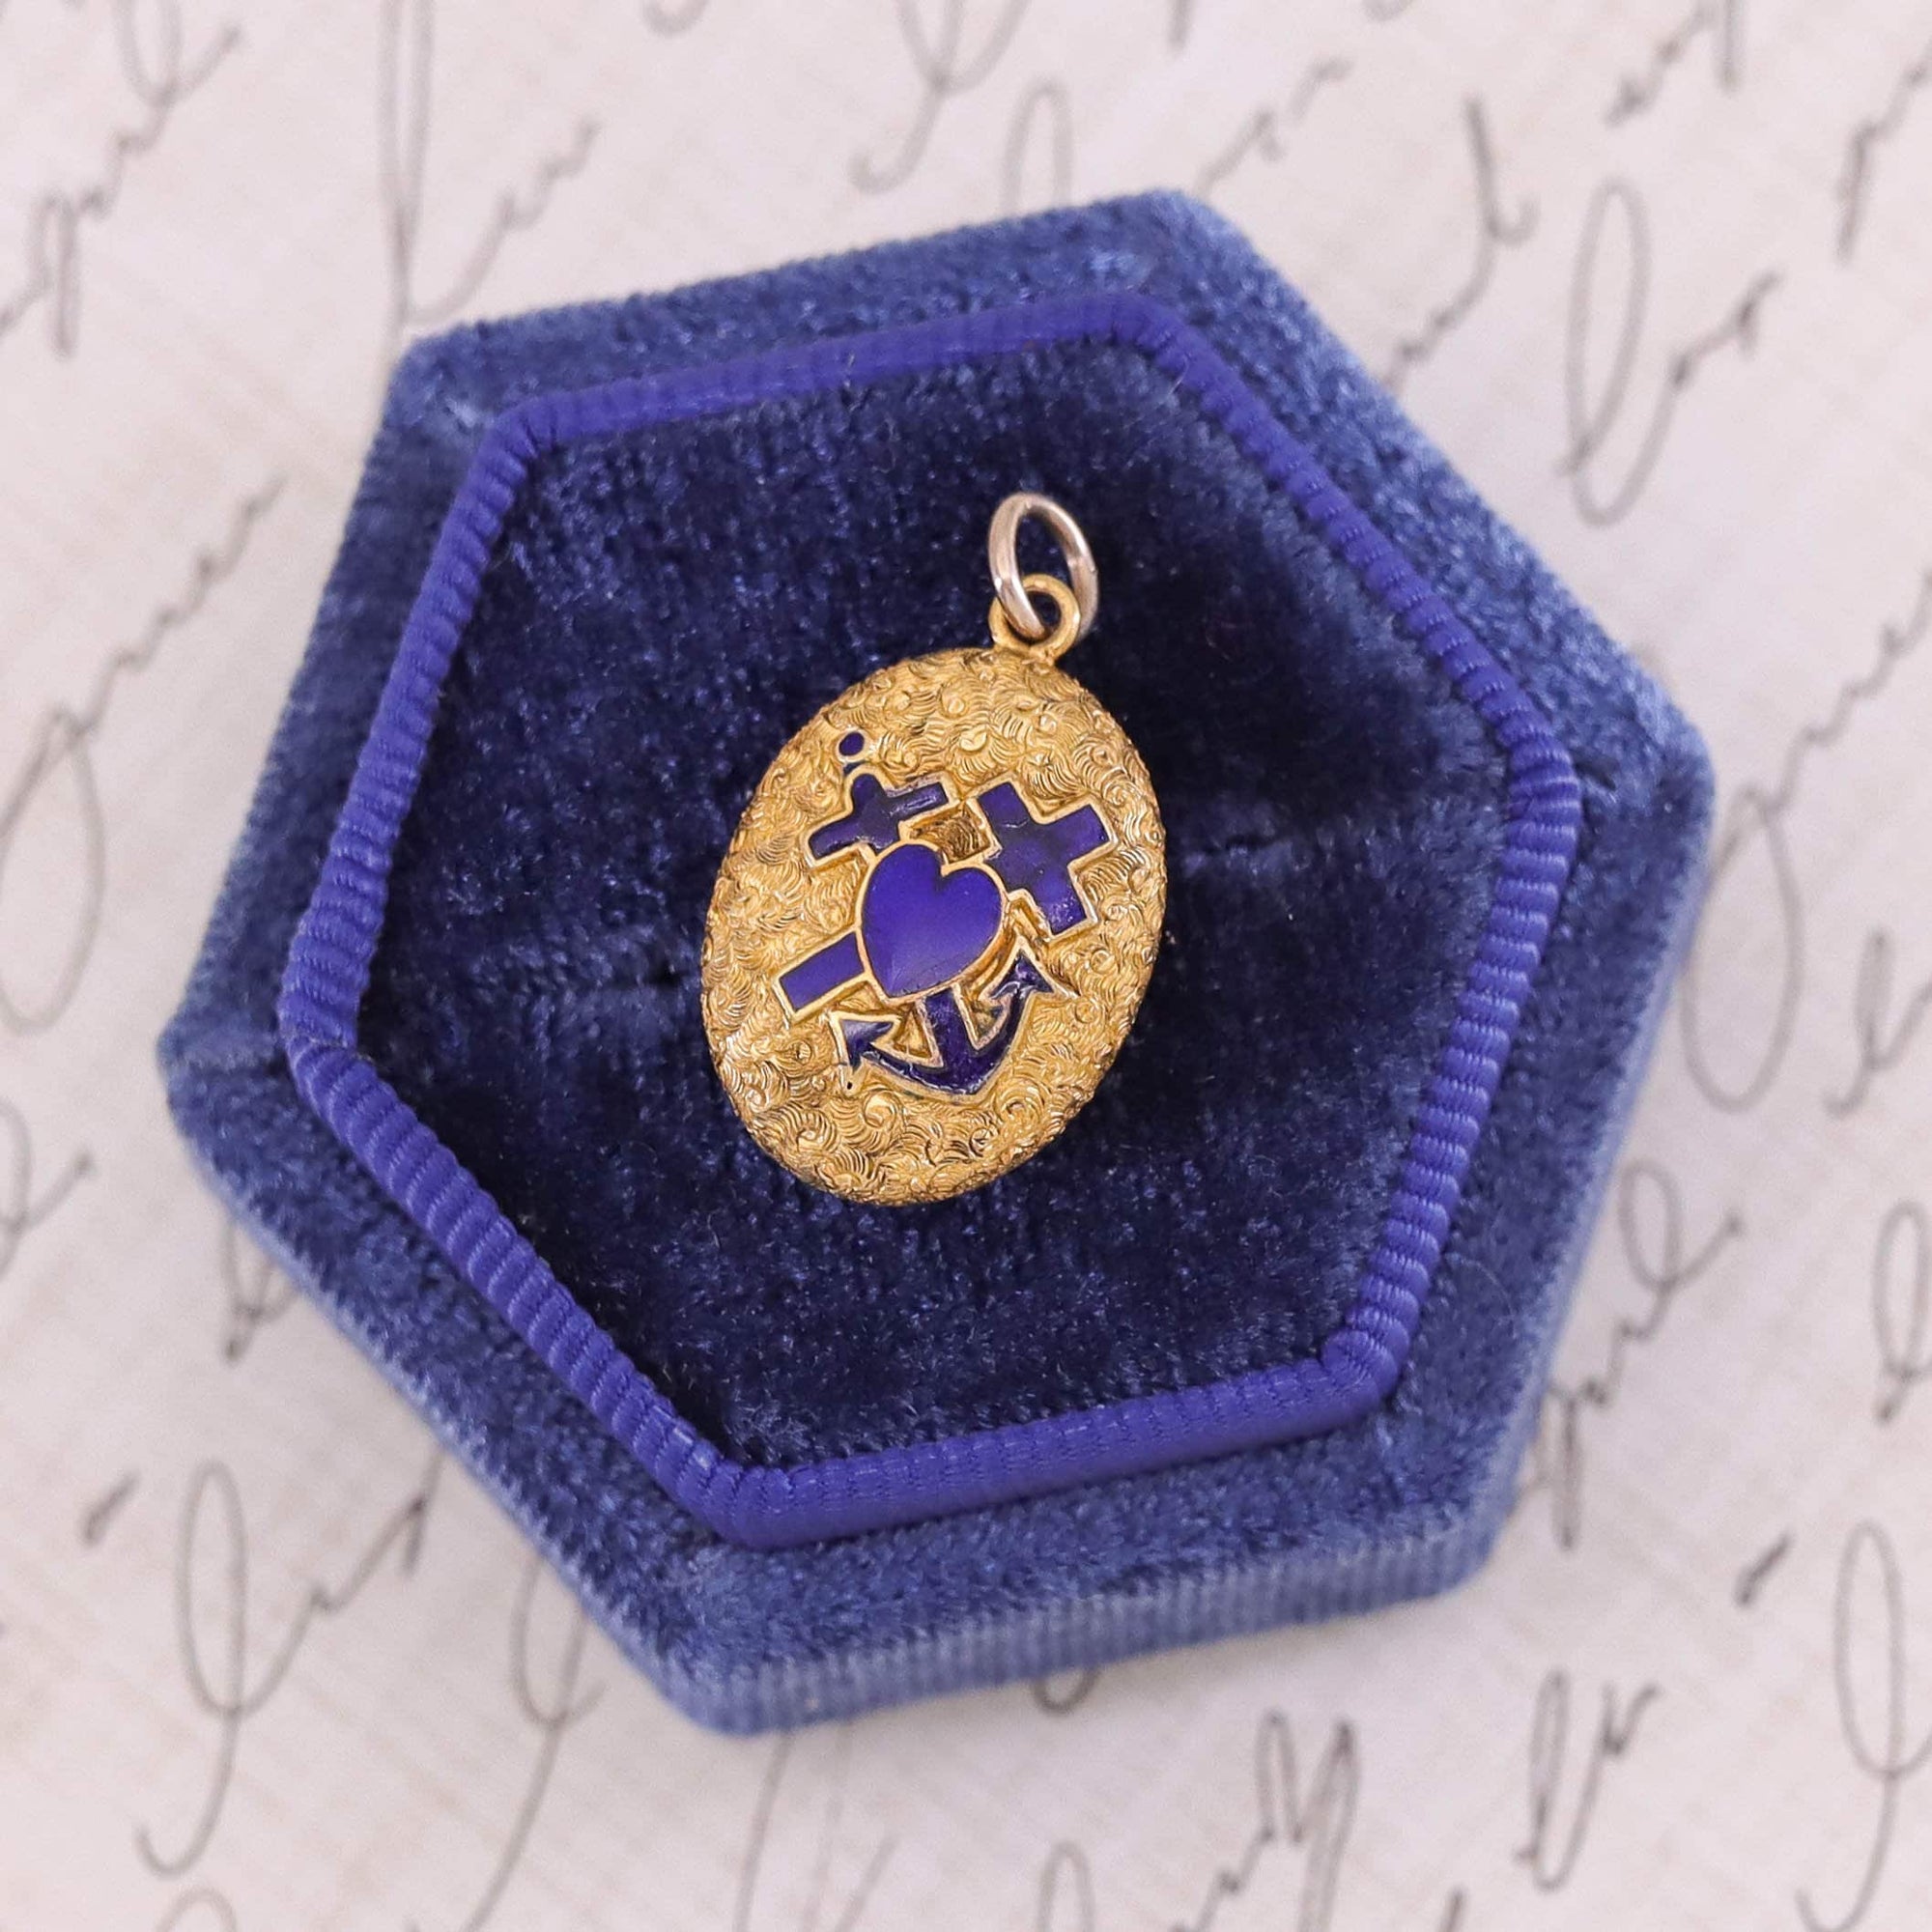 Antique Faith, Hope, and Charity Locket of 14k Gold